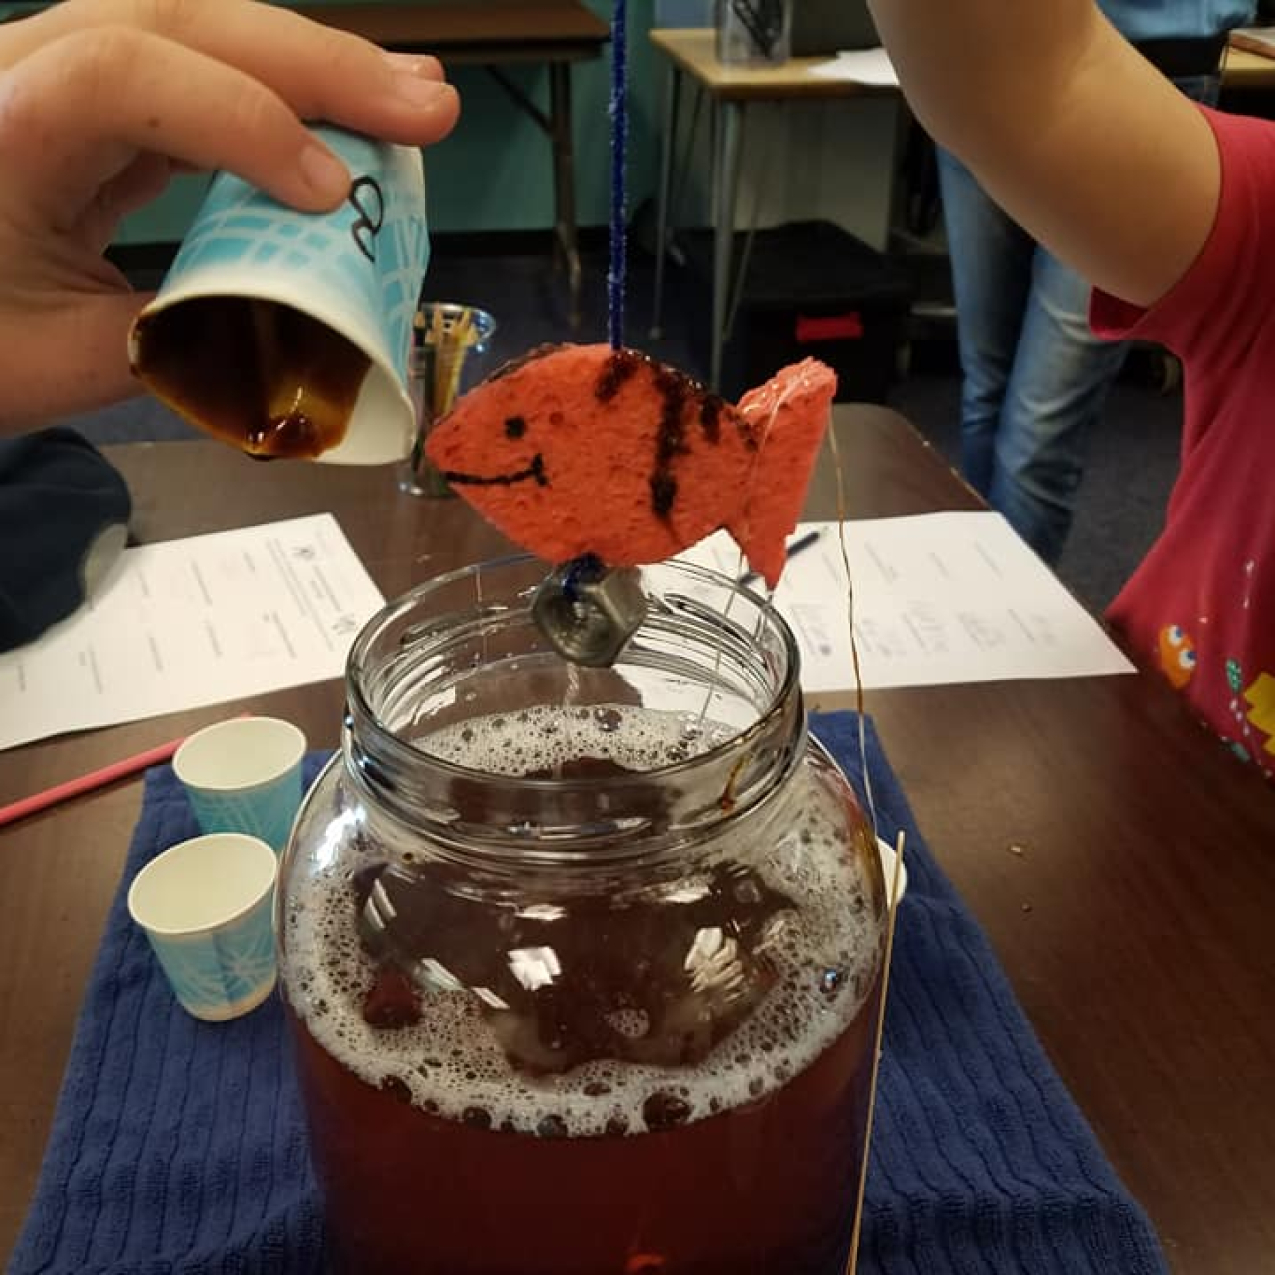 Student hands work with an activity that has a sponge shaped like a fish being dunked into a mason jar full of murky liquid.